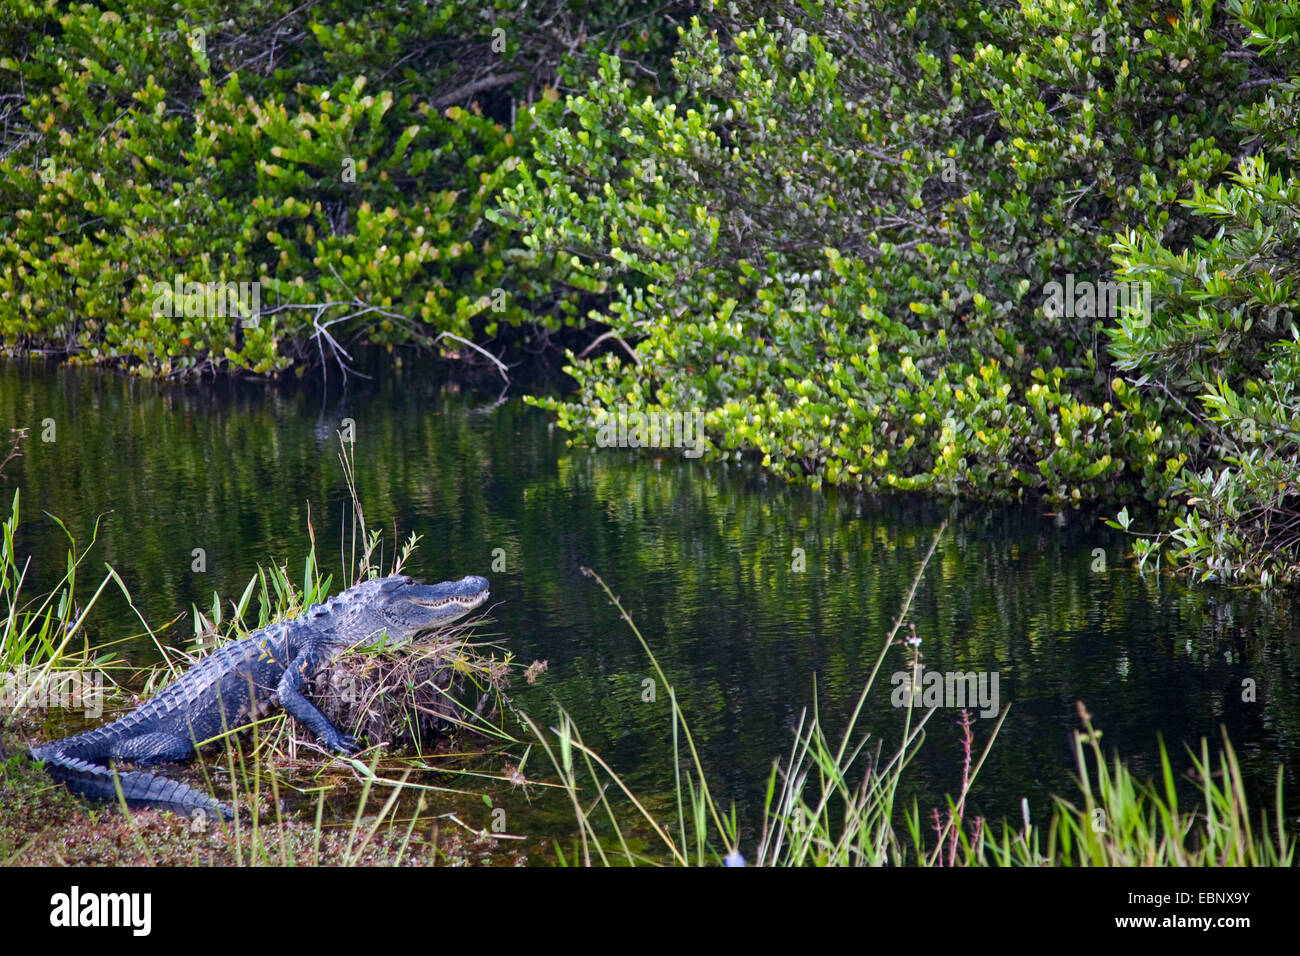 American alligator (Alligator mississippiensis), peering from a shore of a watercourse, USA, Florida, Big Cypress National Preserve Stock Photo